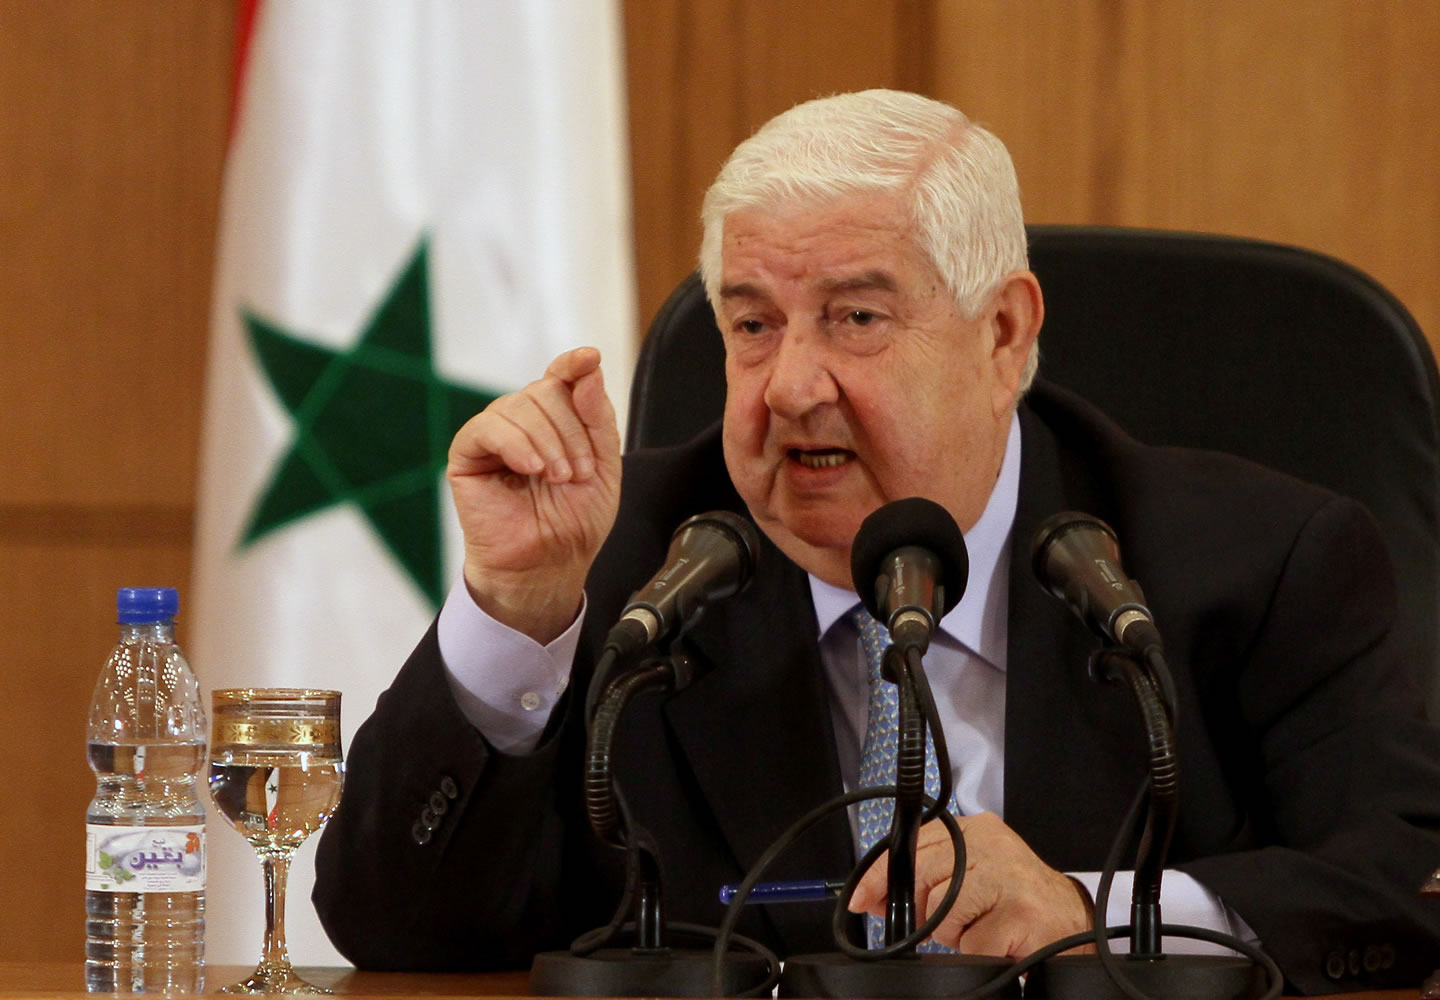 Syrian Foreign Minister Walid al-Moallem speaks during a press conference in Damascus, Syria on Tuesday.